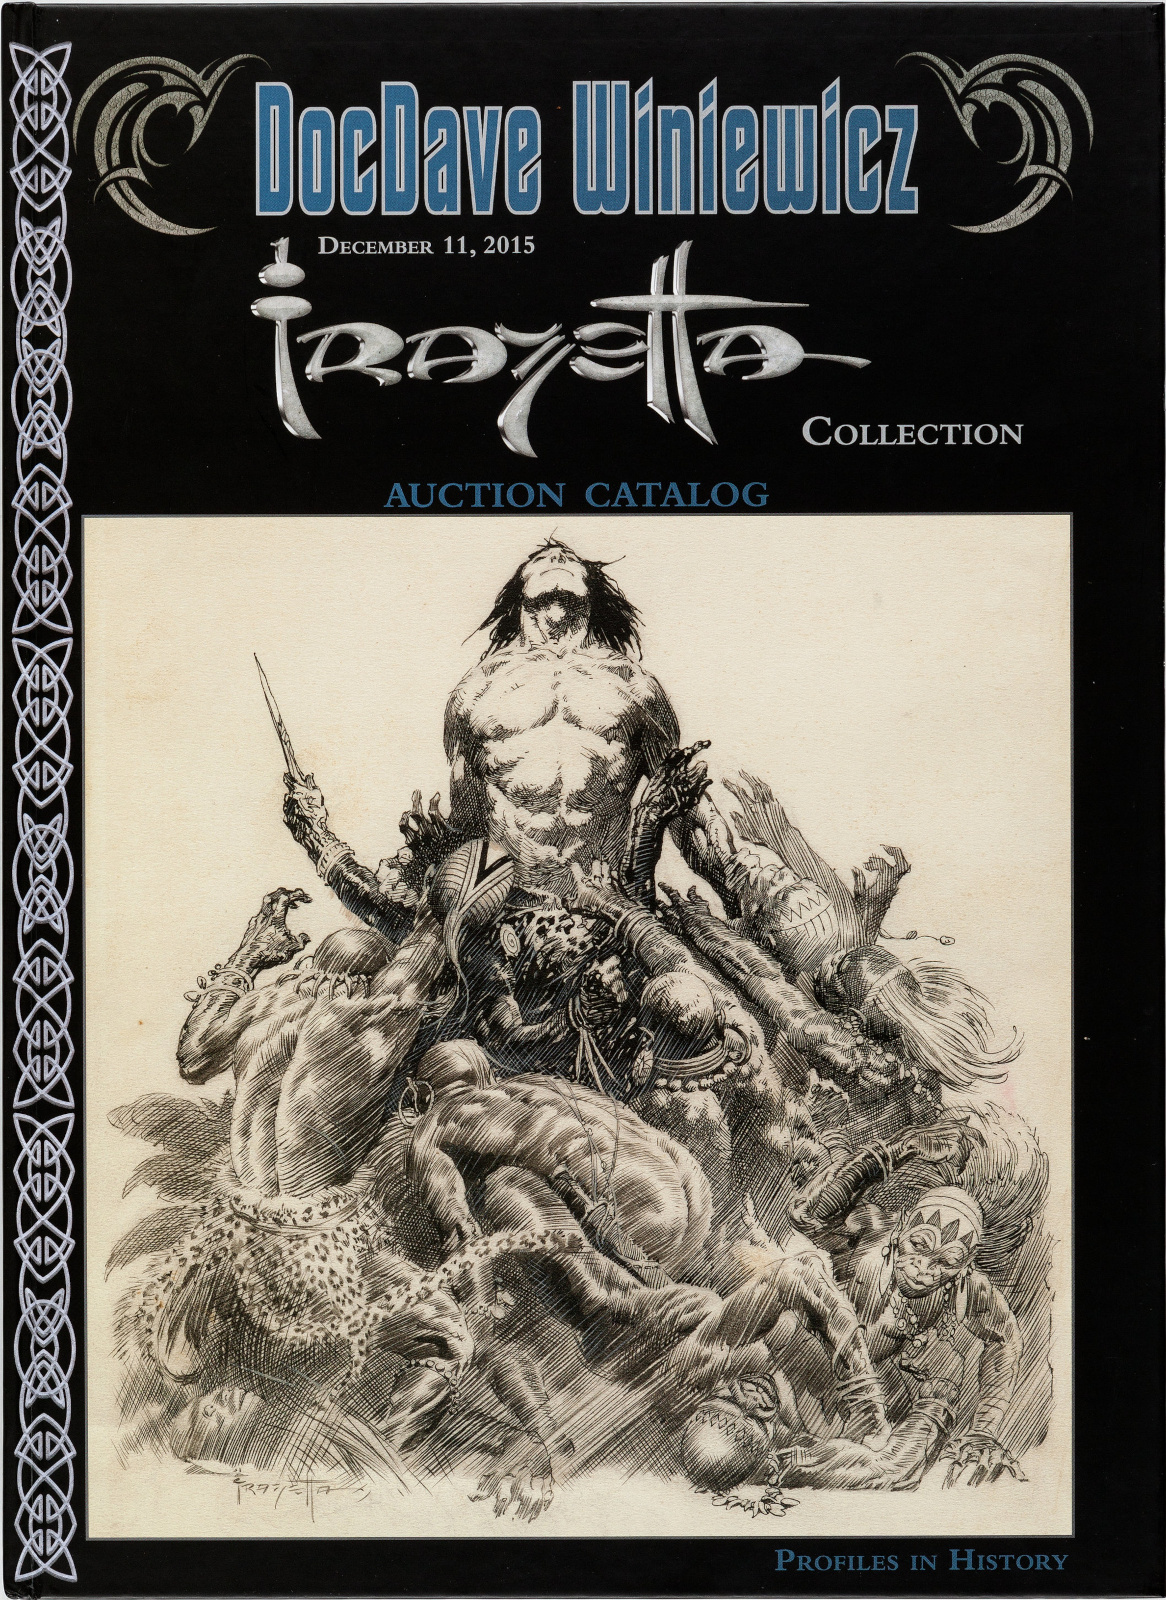 DocDave-Winiewicz-Frazetta-Collection-Auction-Catalog-cover.jpg